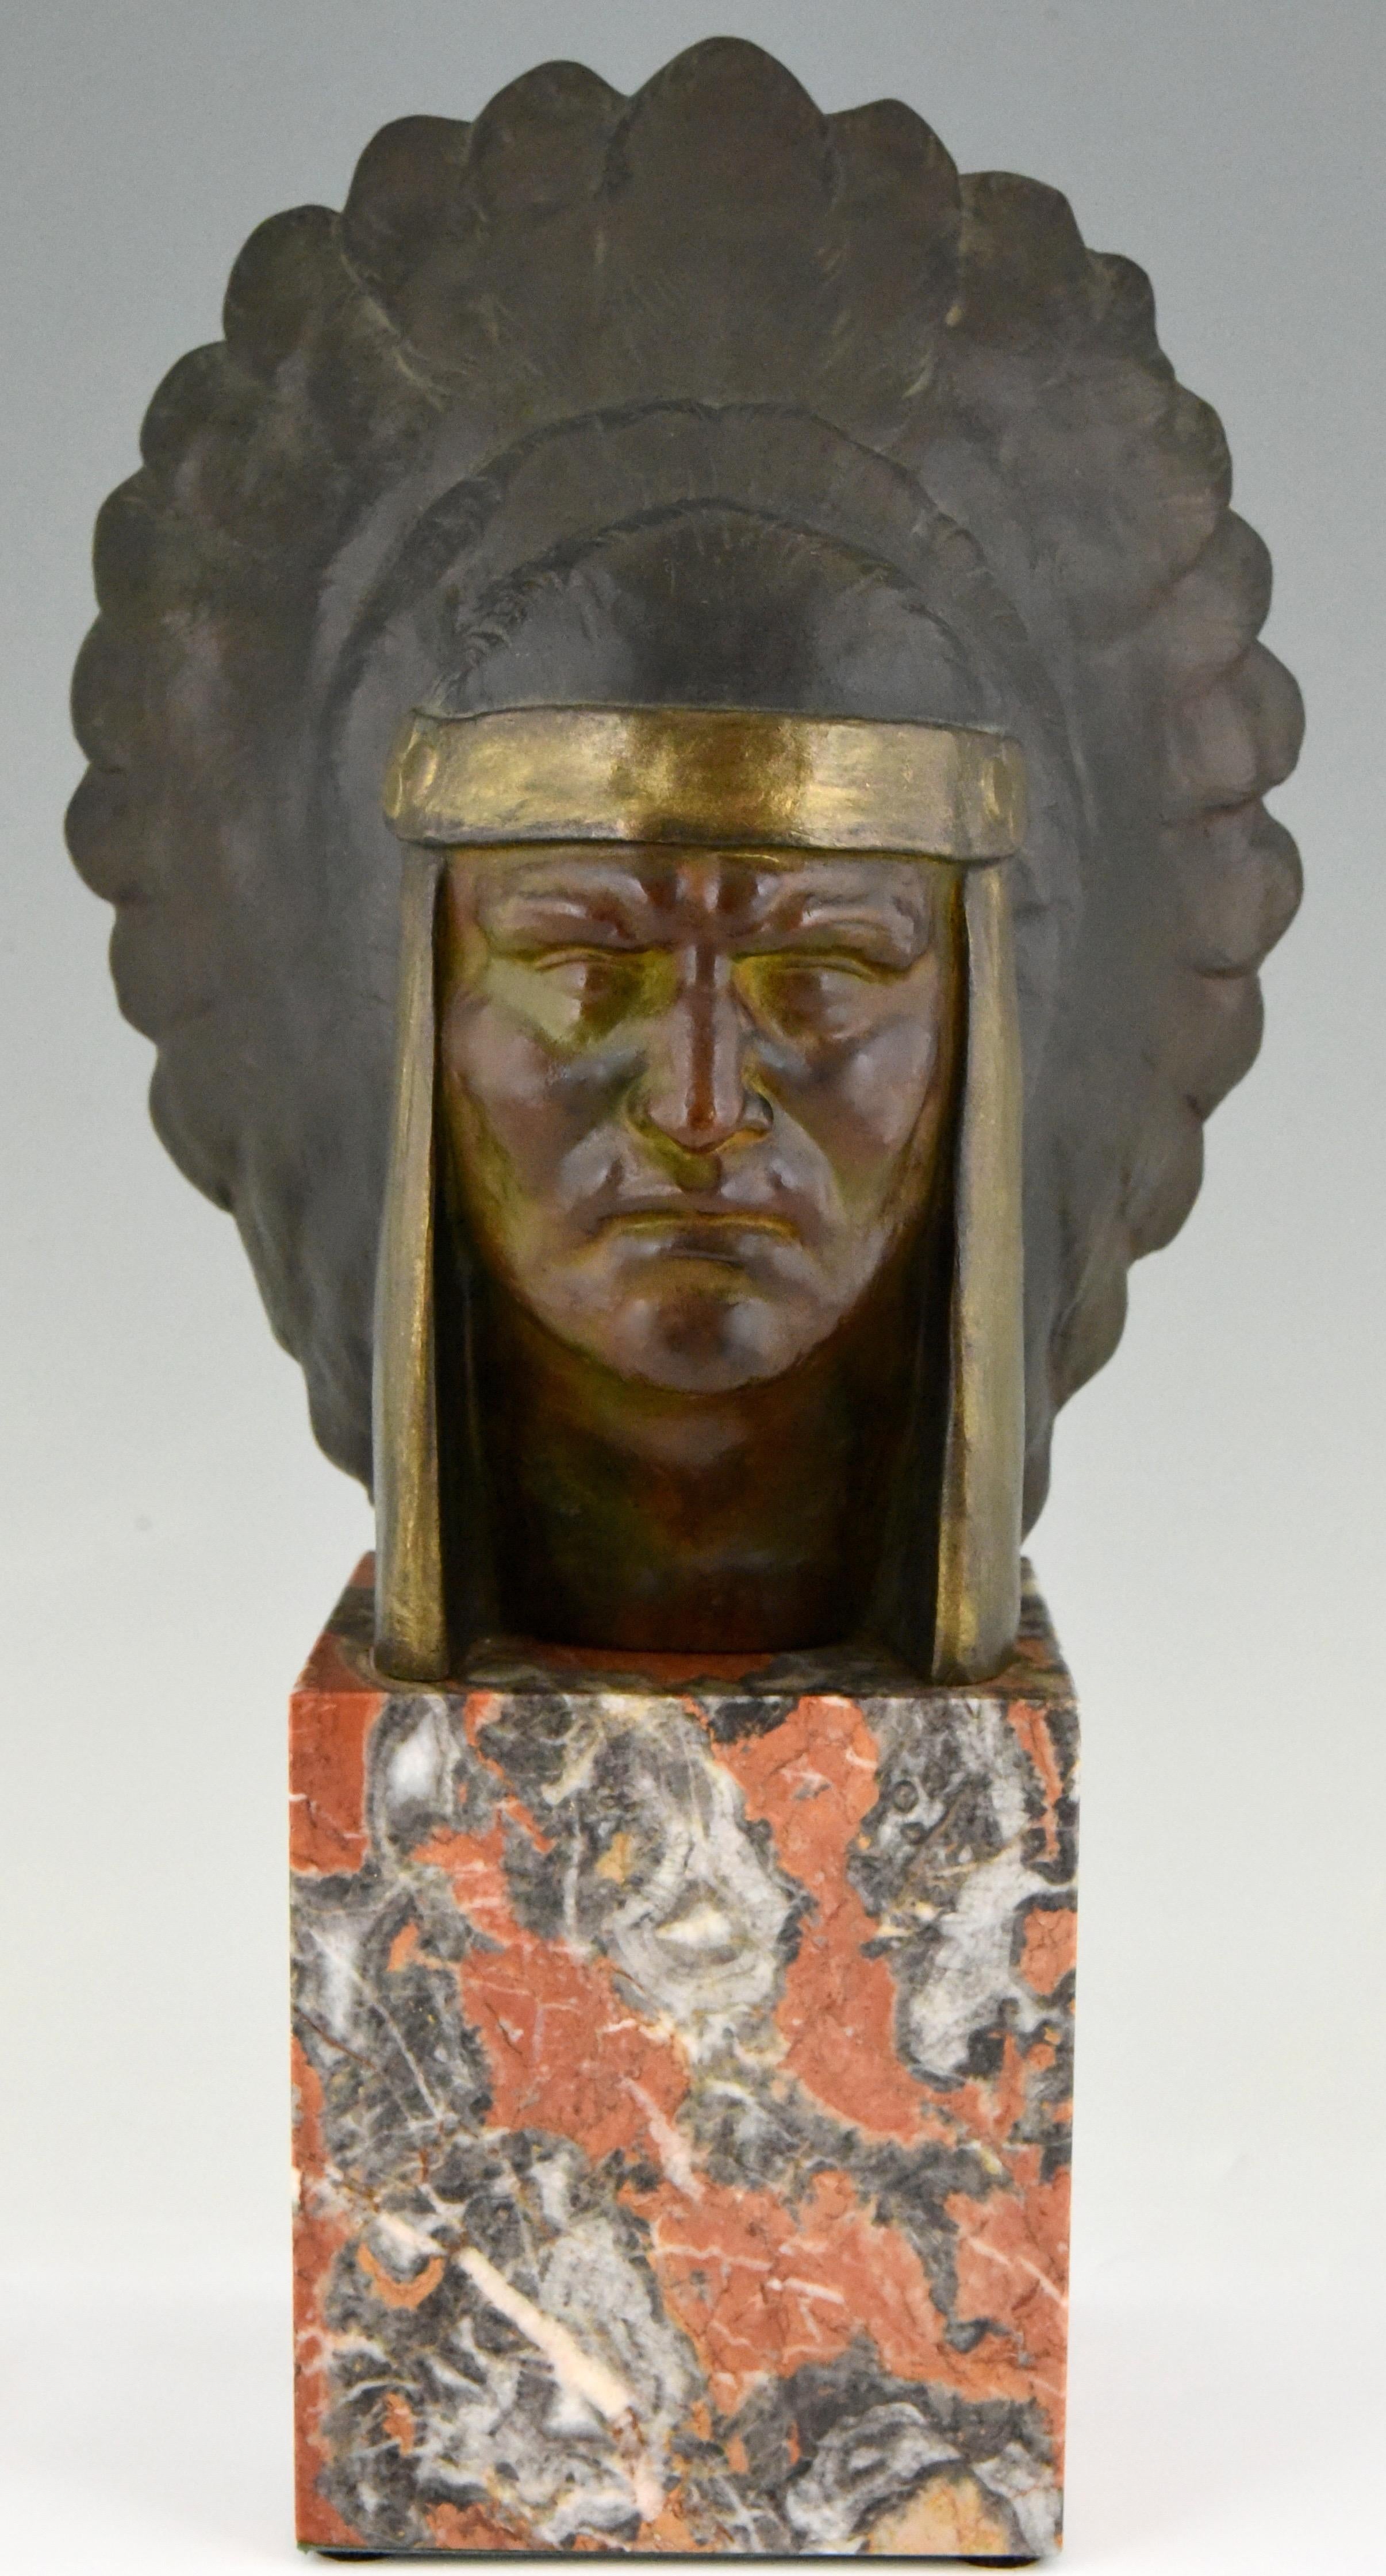 Impressive Art Deco bronze bust of an Indian with headdress by the French artist Georges Garreau. The sculpture has a beautiful multi-color patina and stands on a marble base, circa 1930.
Literature:
“Dictionnaire illustré des sculpteurs